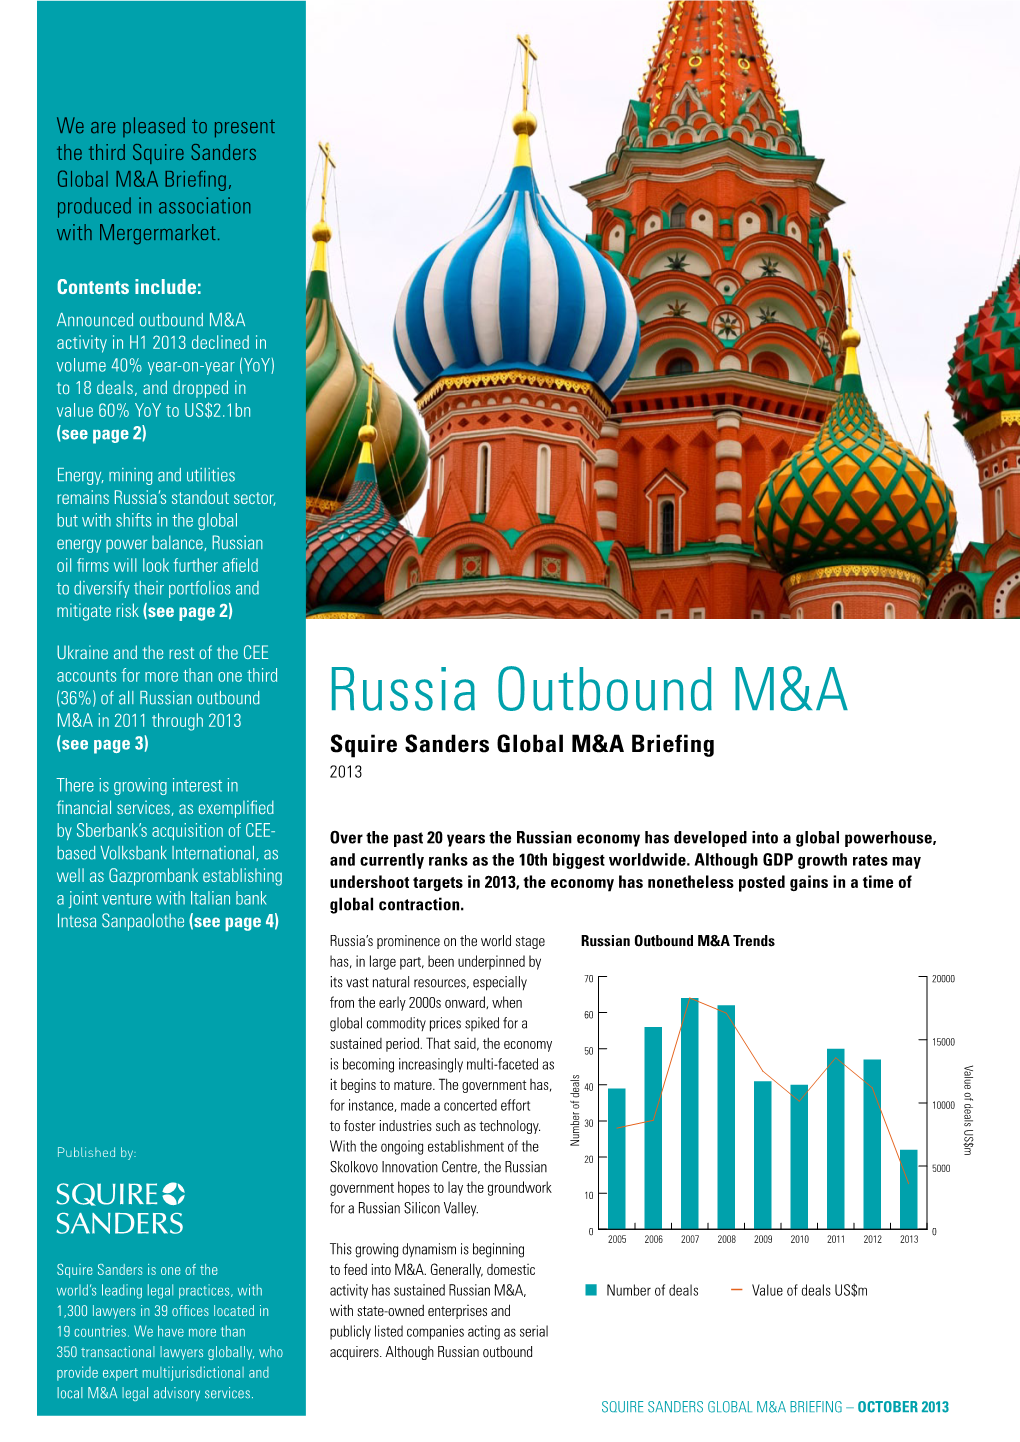 Russia Outbound M&A